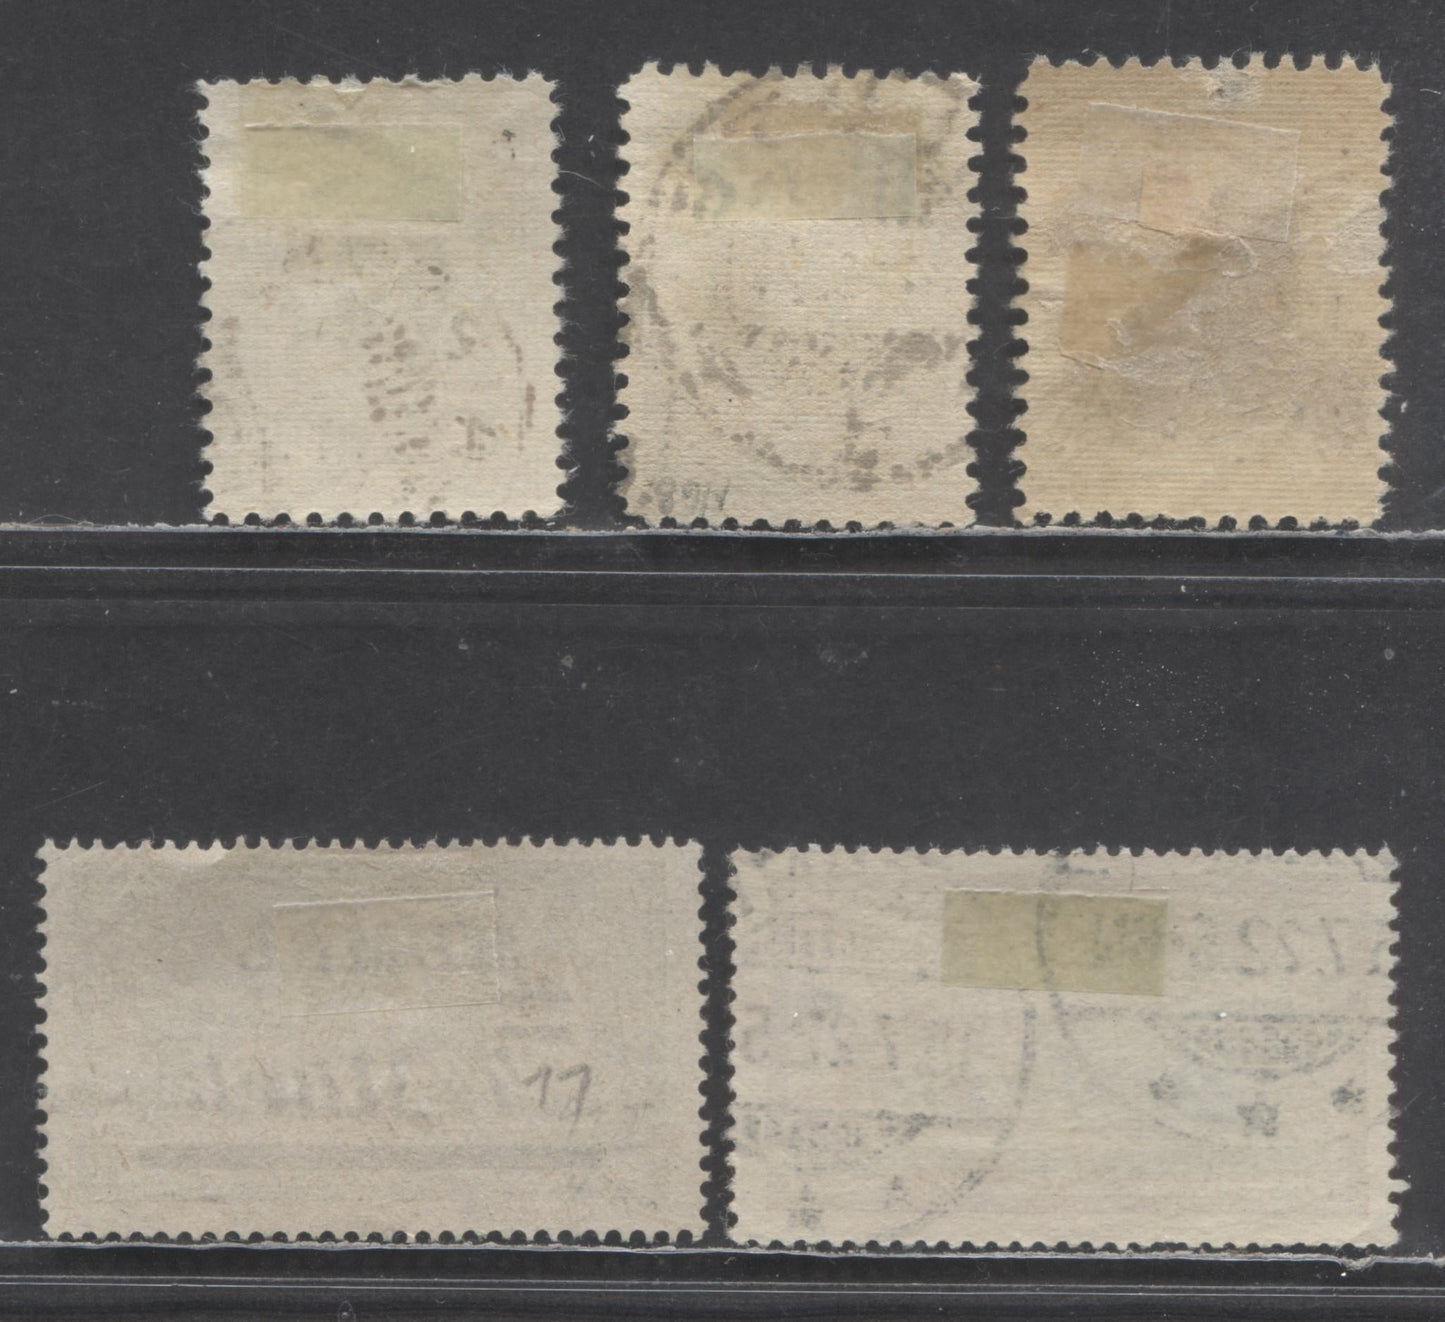 Lot 68 Memel SC#73/N75 1922 Surcharged French Liberty & Surcharged Lithuania Issues, 5 Very Good/Fine Used Singles, Click on Listing to See ALL Pictures, Estimated Value $15